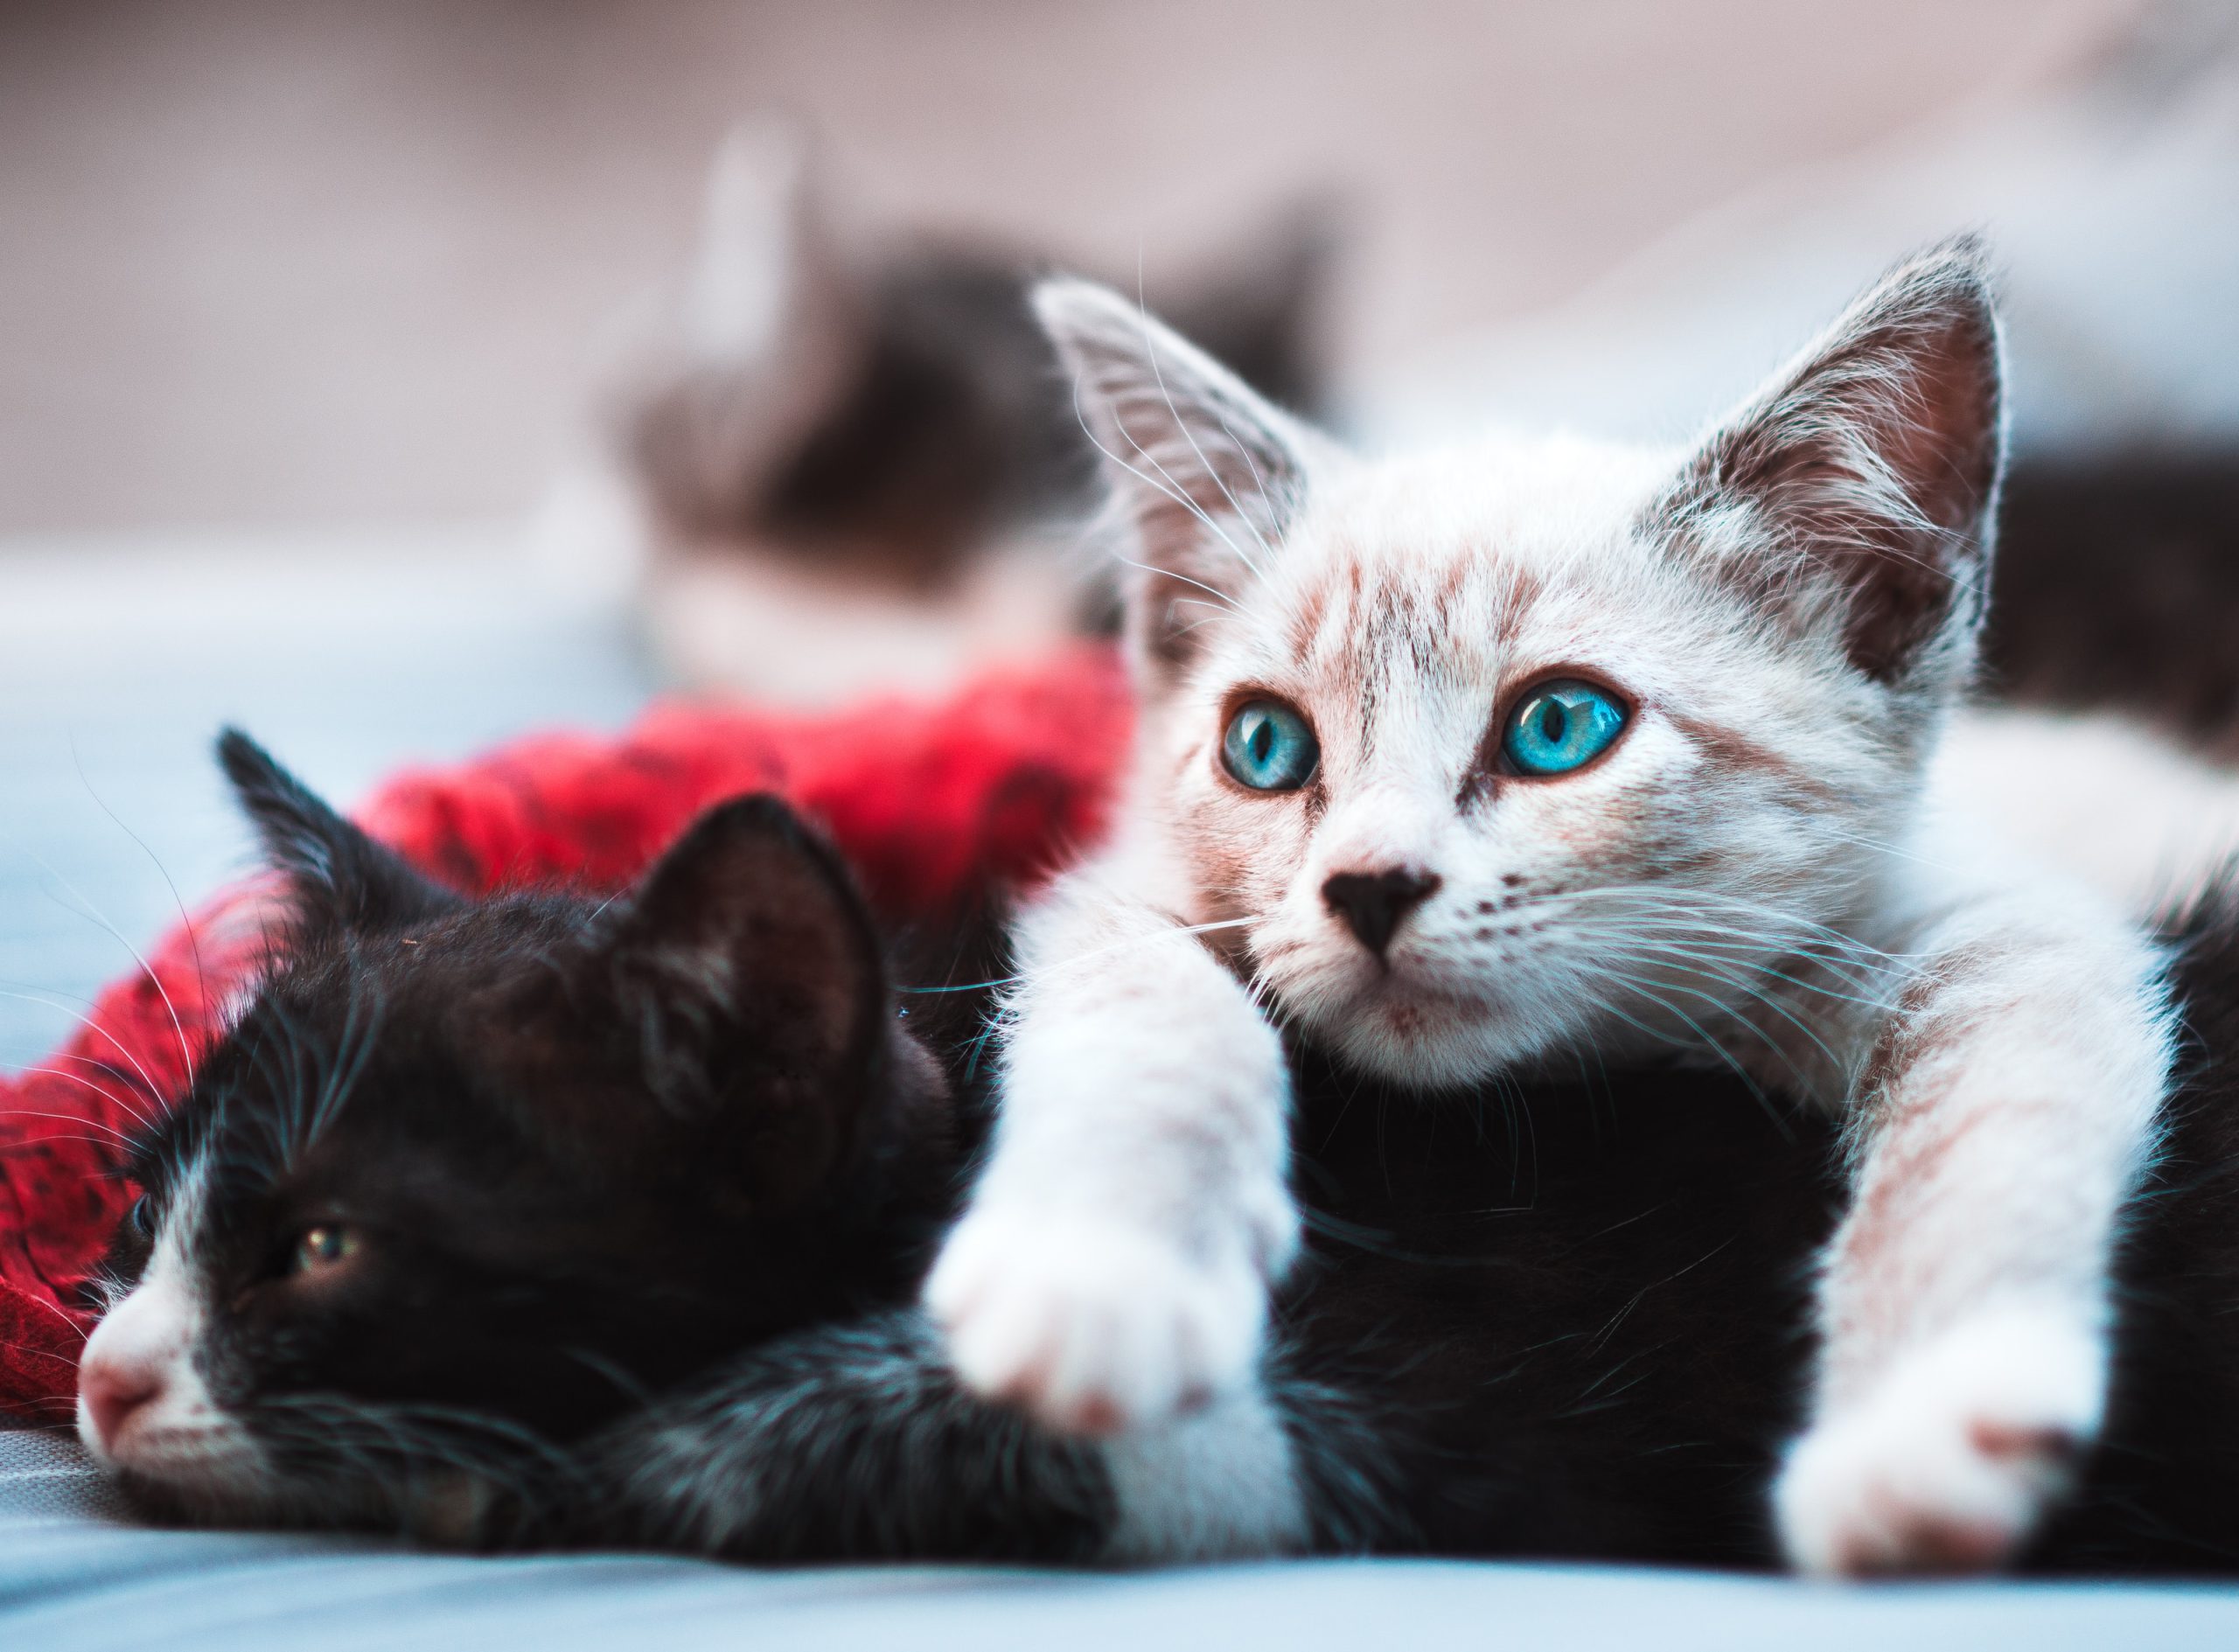 Two kittens relaxing together